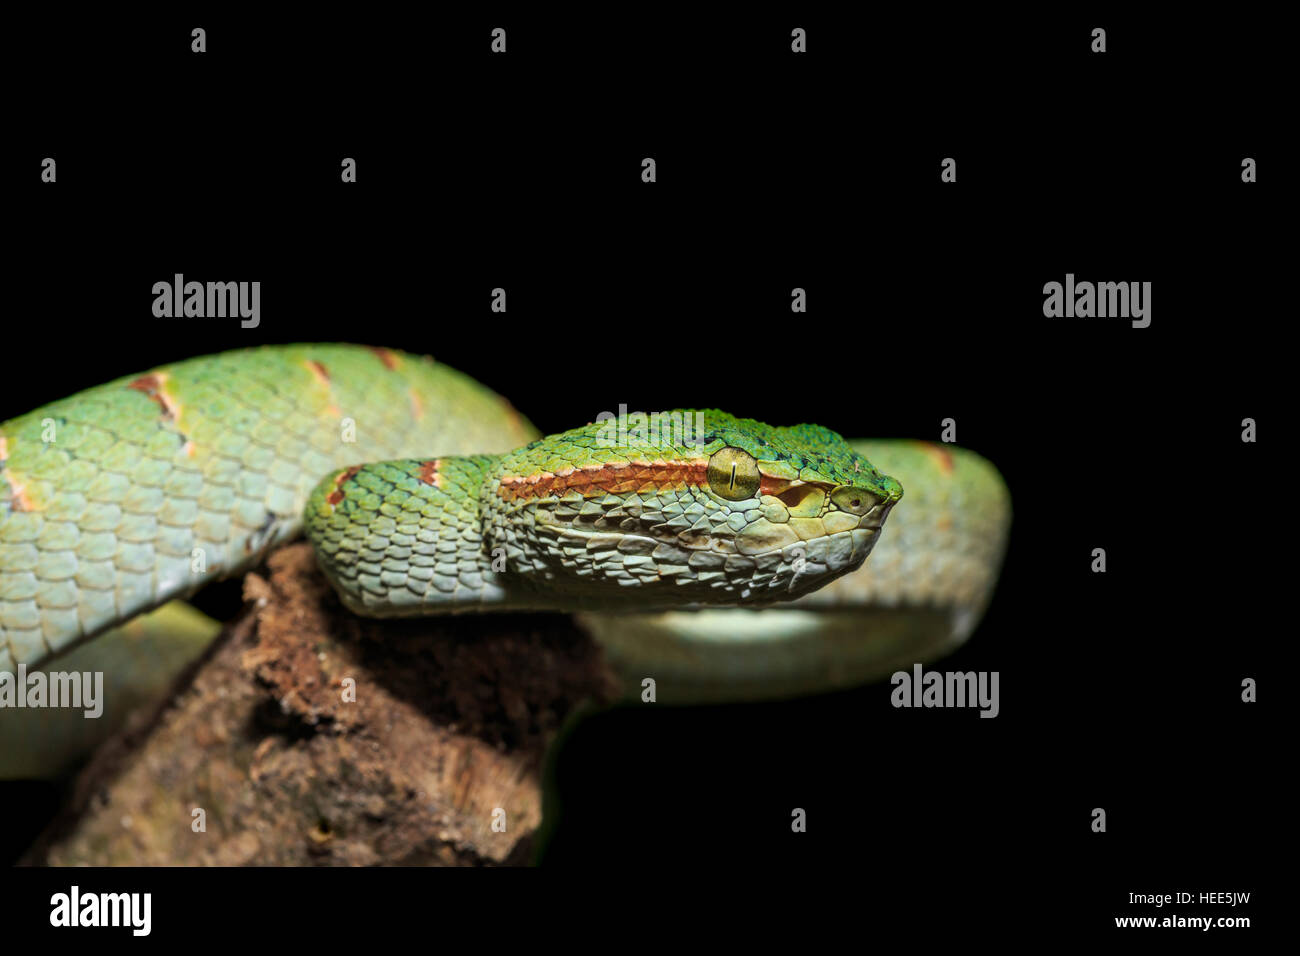 https://c8.alamy.com/comp/HEE5JW/green-snake-or-green-pit-viper-in-nature-of-thailand-isolated-on-black-HEE5JW.jpg